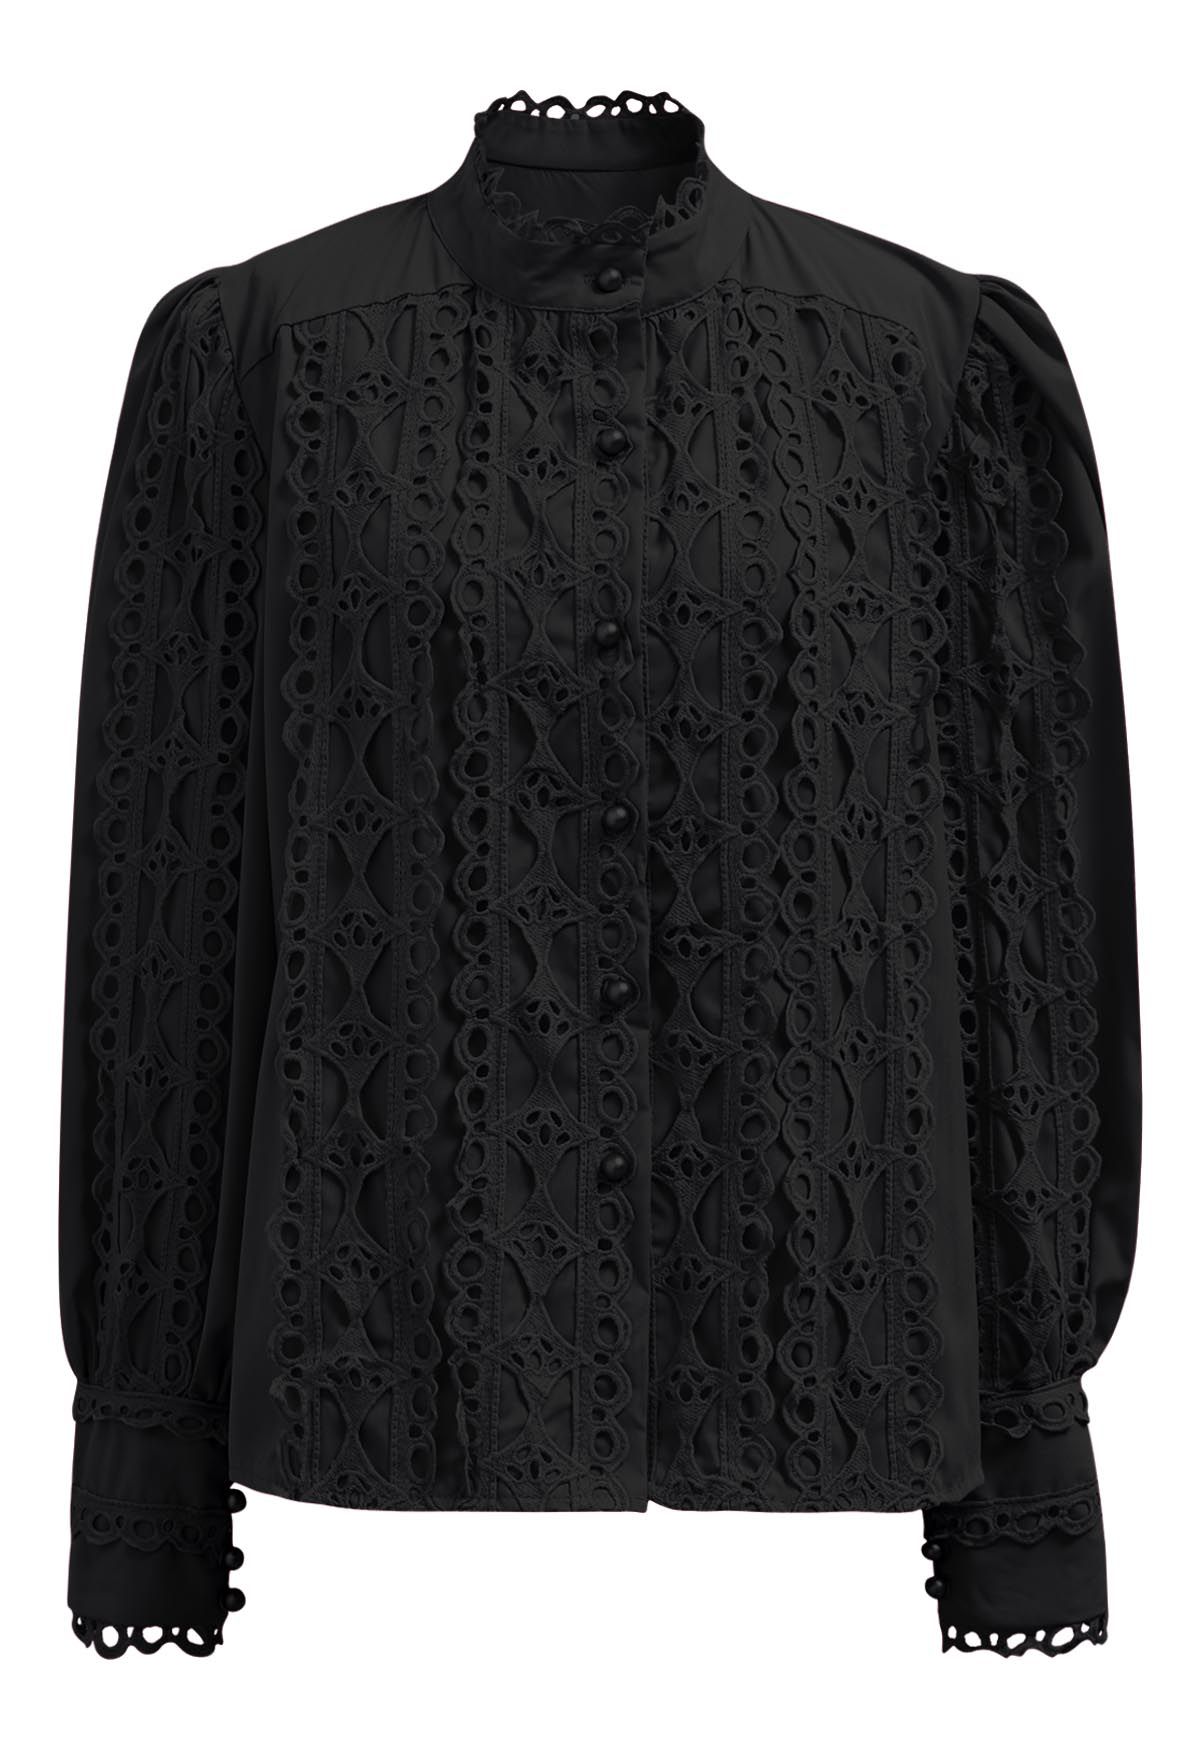 Exquisite Cutwork Bubble Sleeves Button-Up Shirt in Black - Retro ...